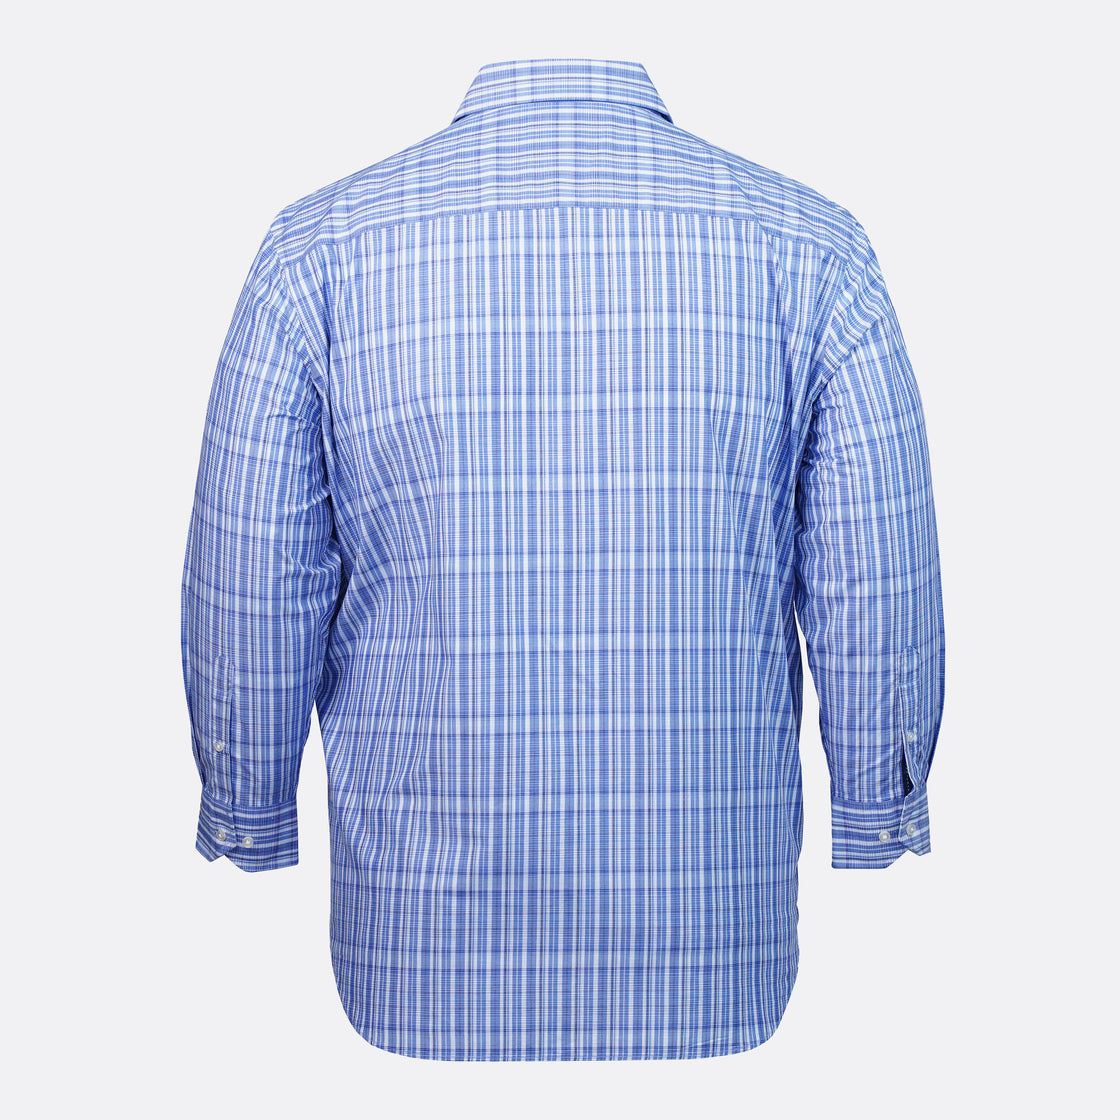 Tailorbyrd Checkered Shirt